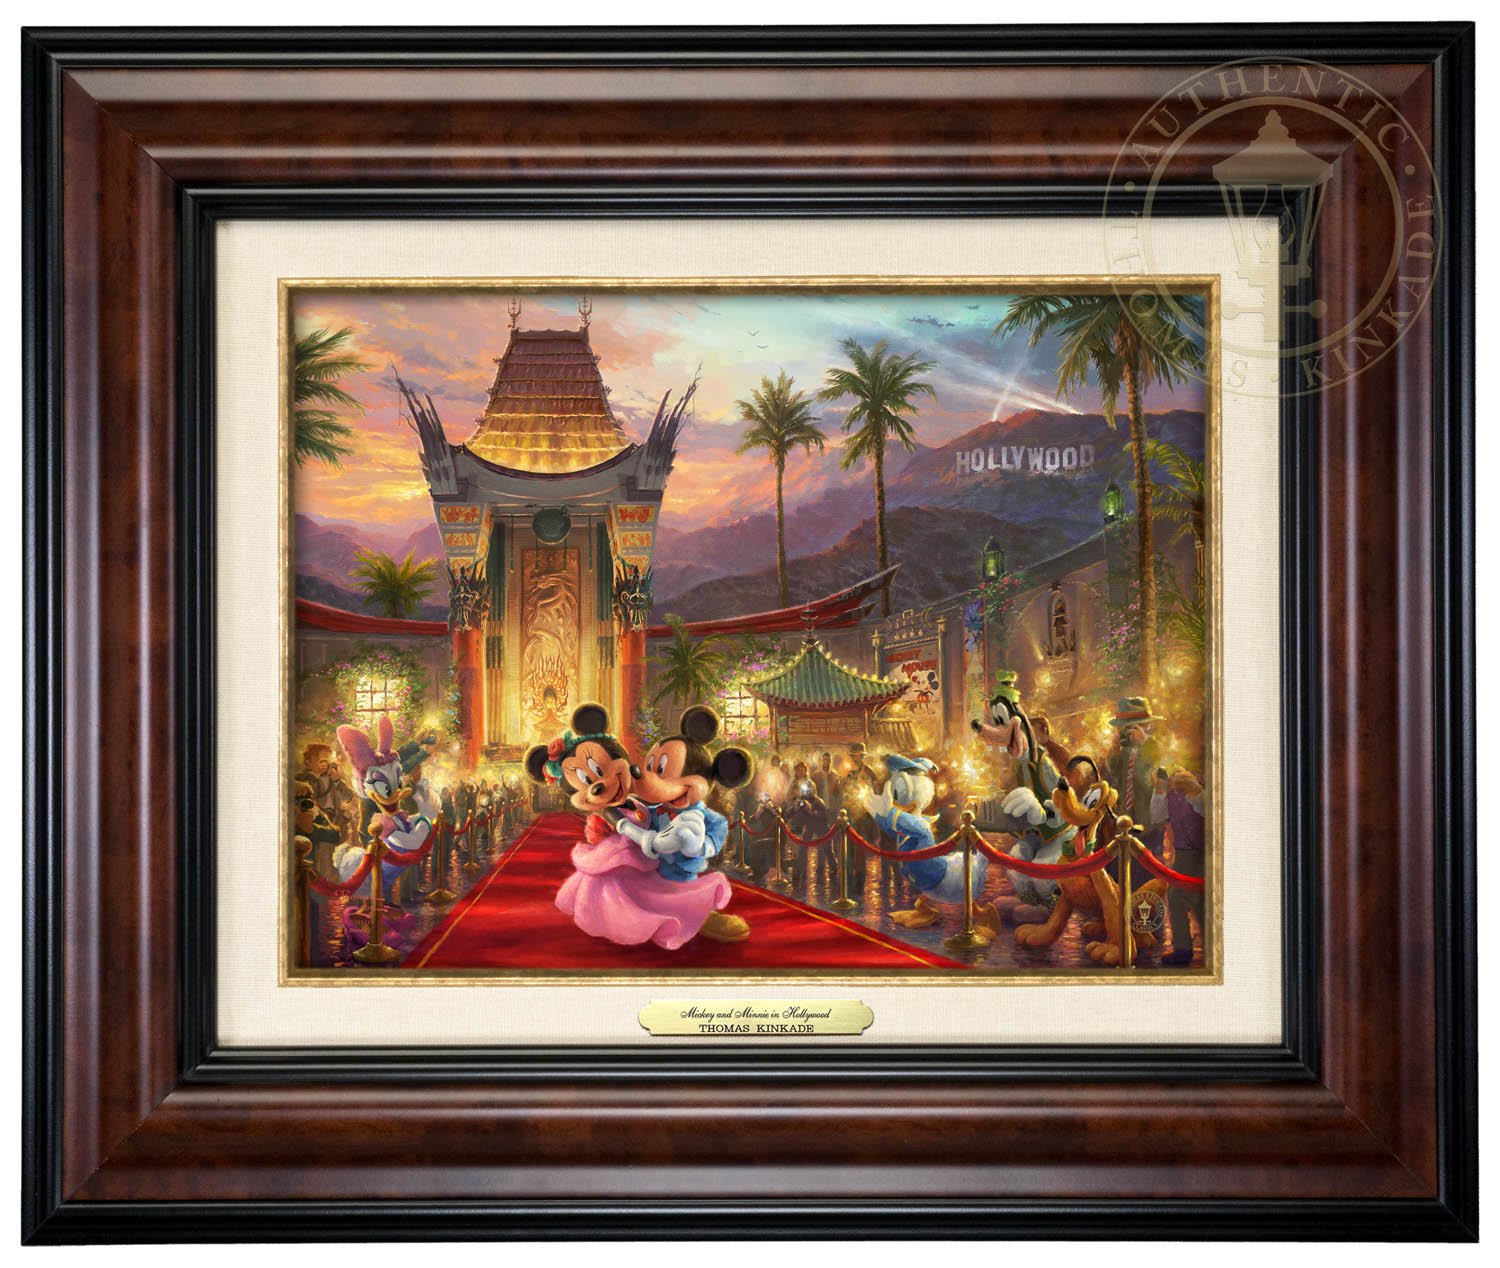  Mickey and Minnie walk the red carpet - Burl Frame